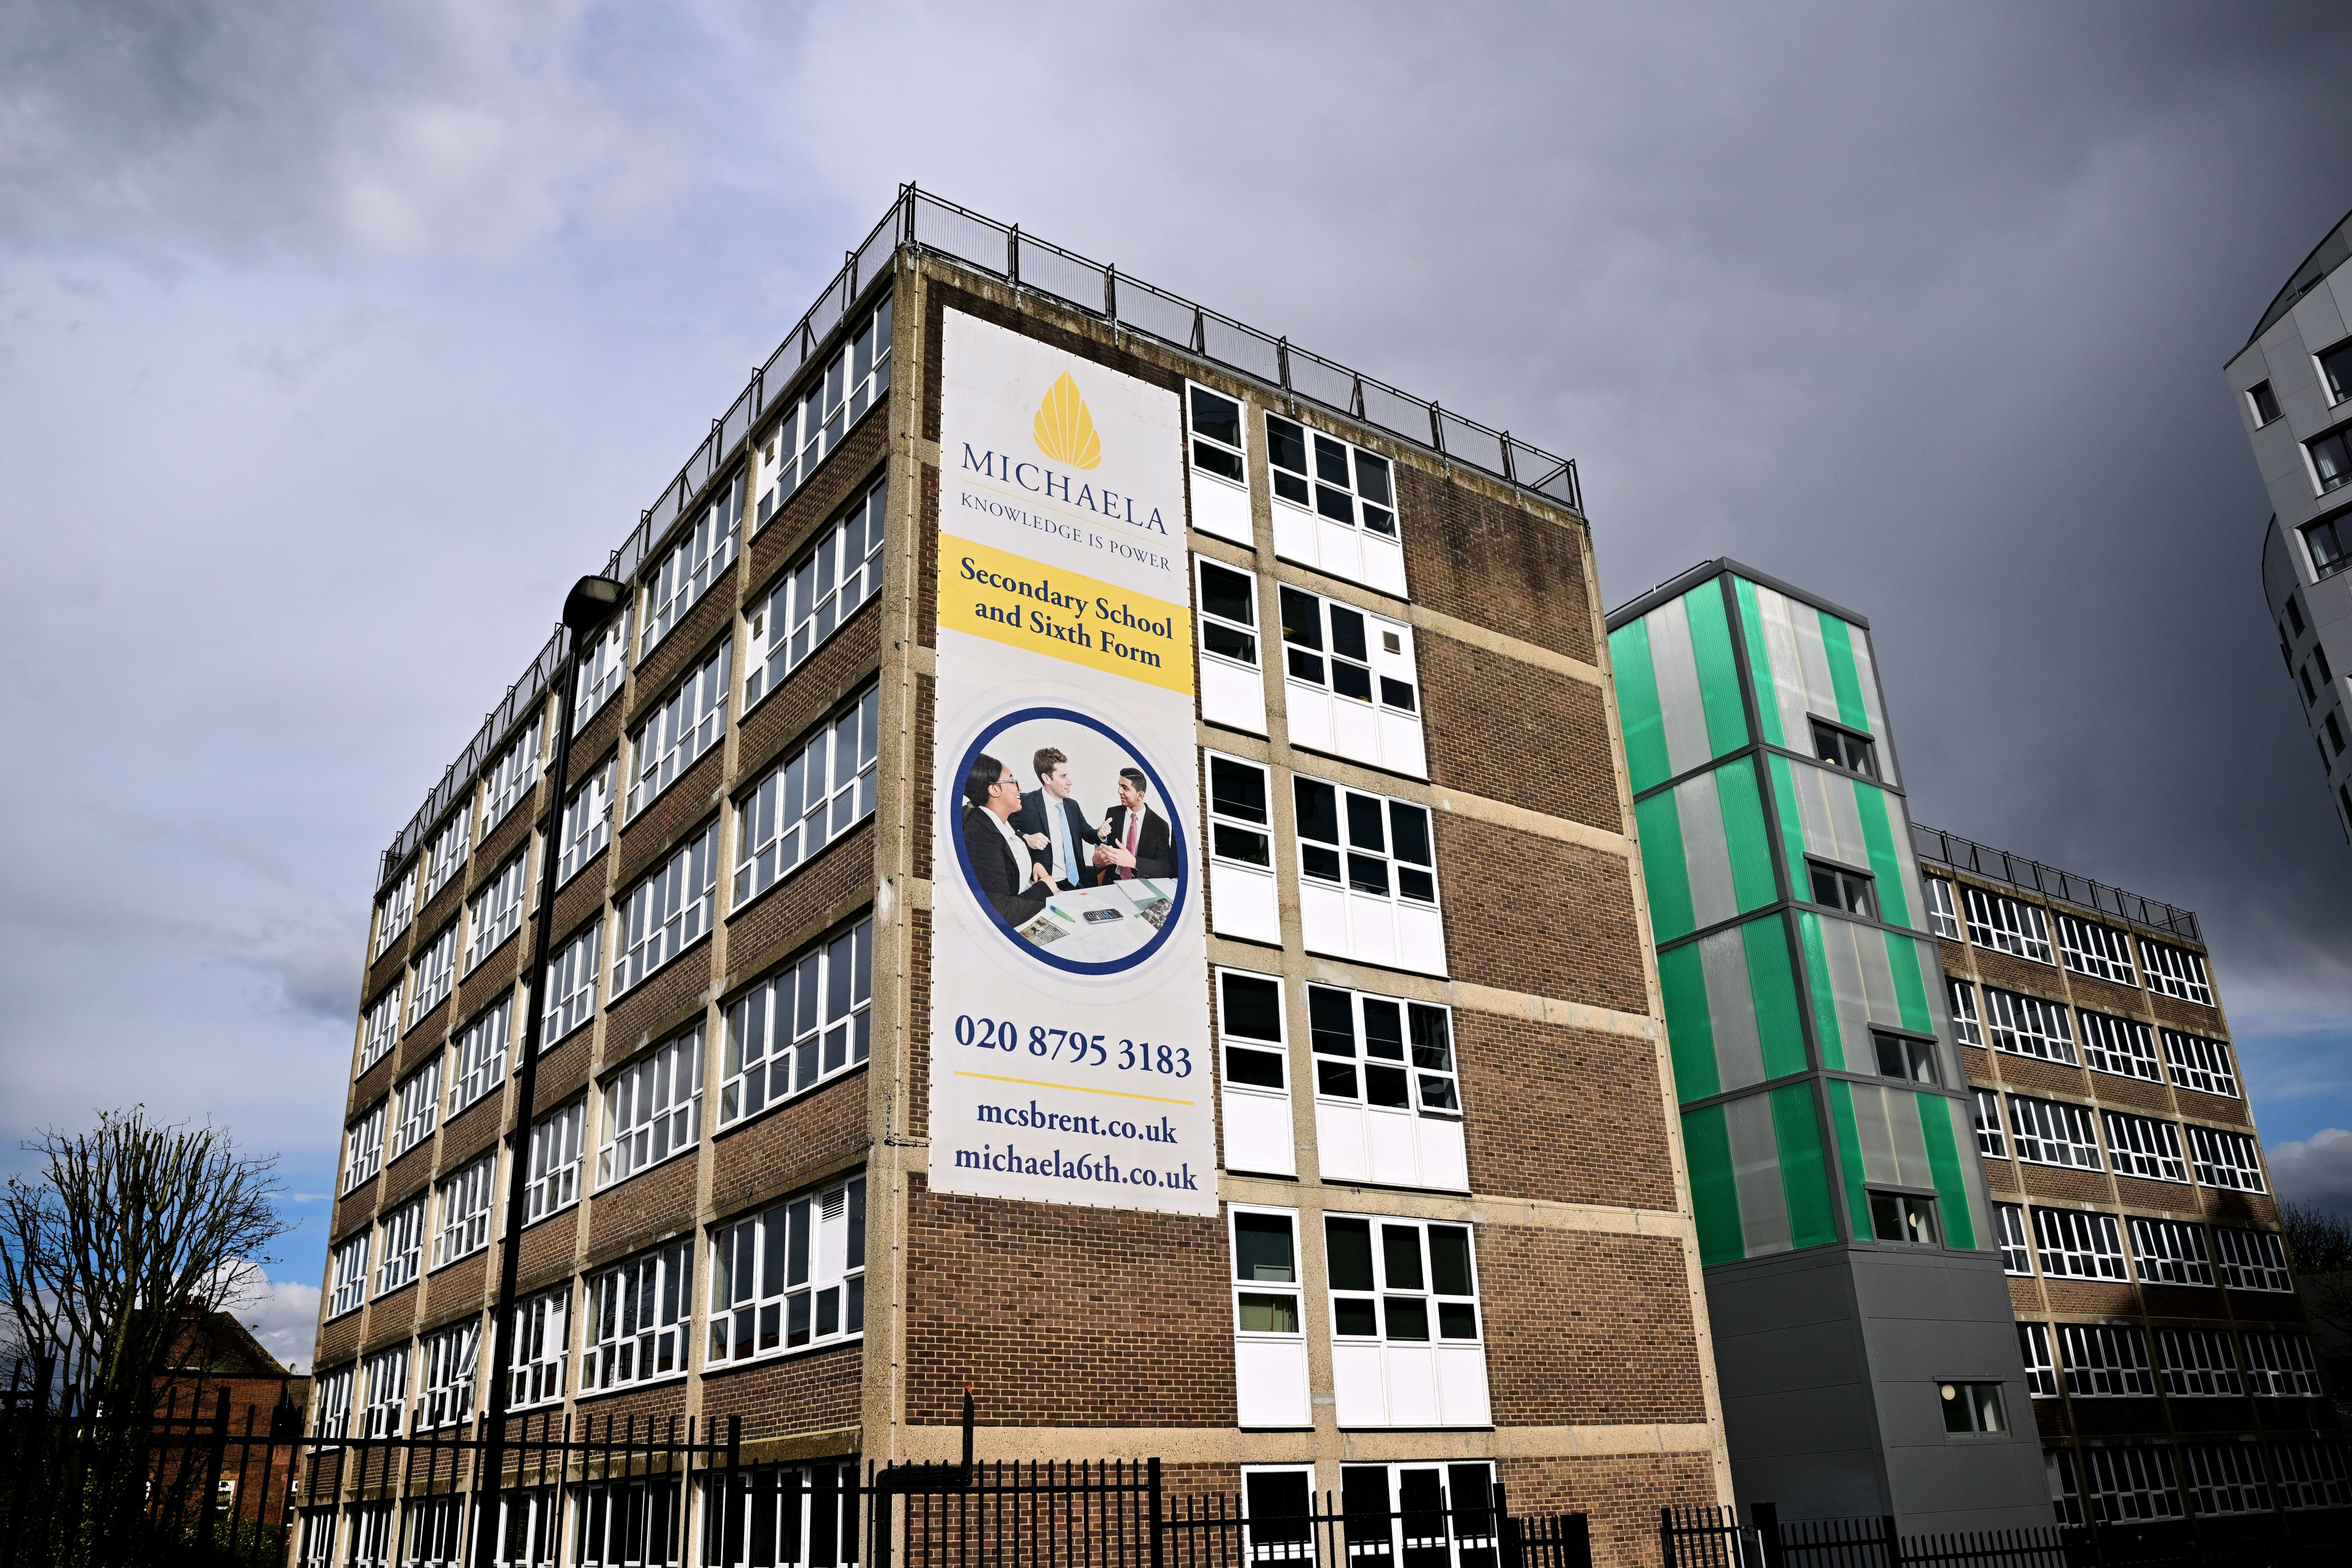 Michaela Community School in London has a secular ethos that was challenged in court